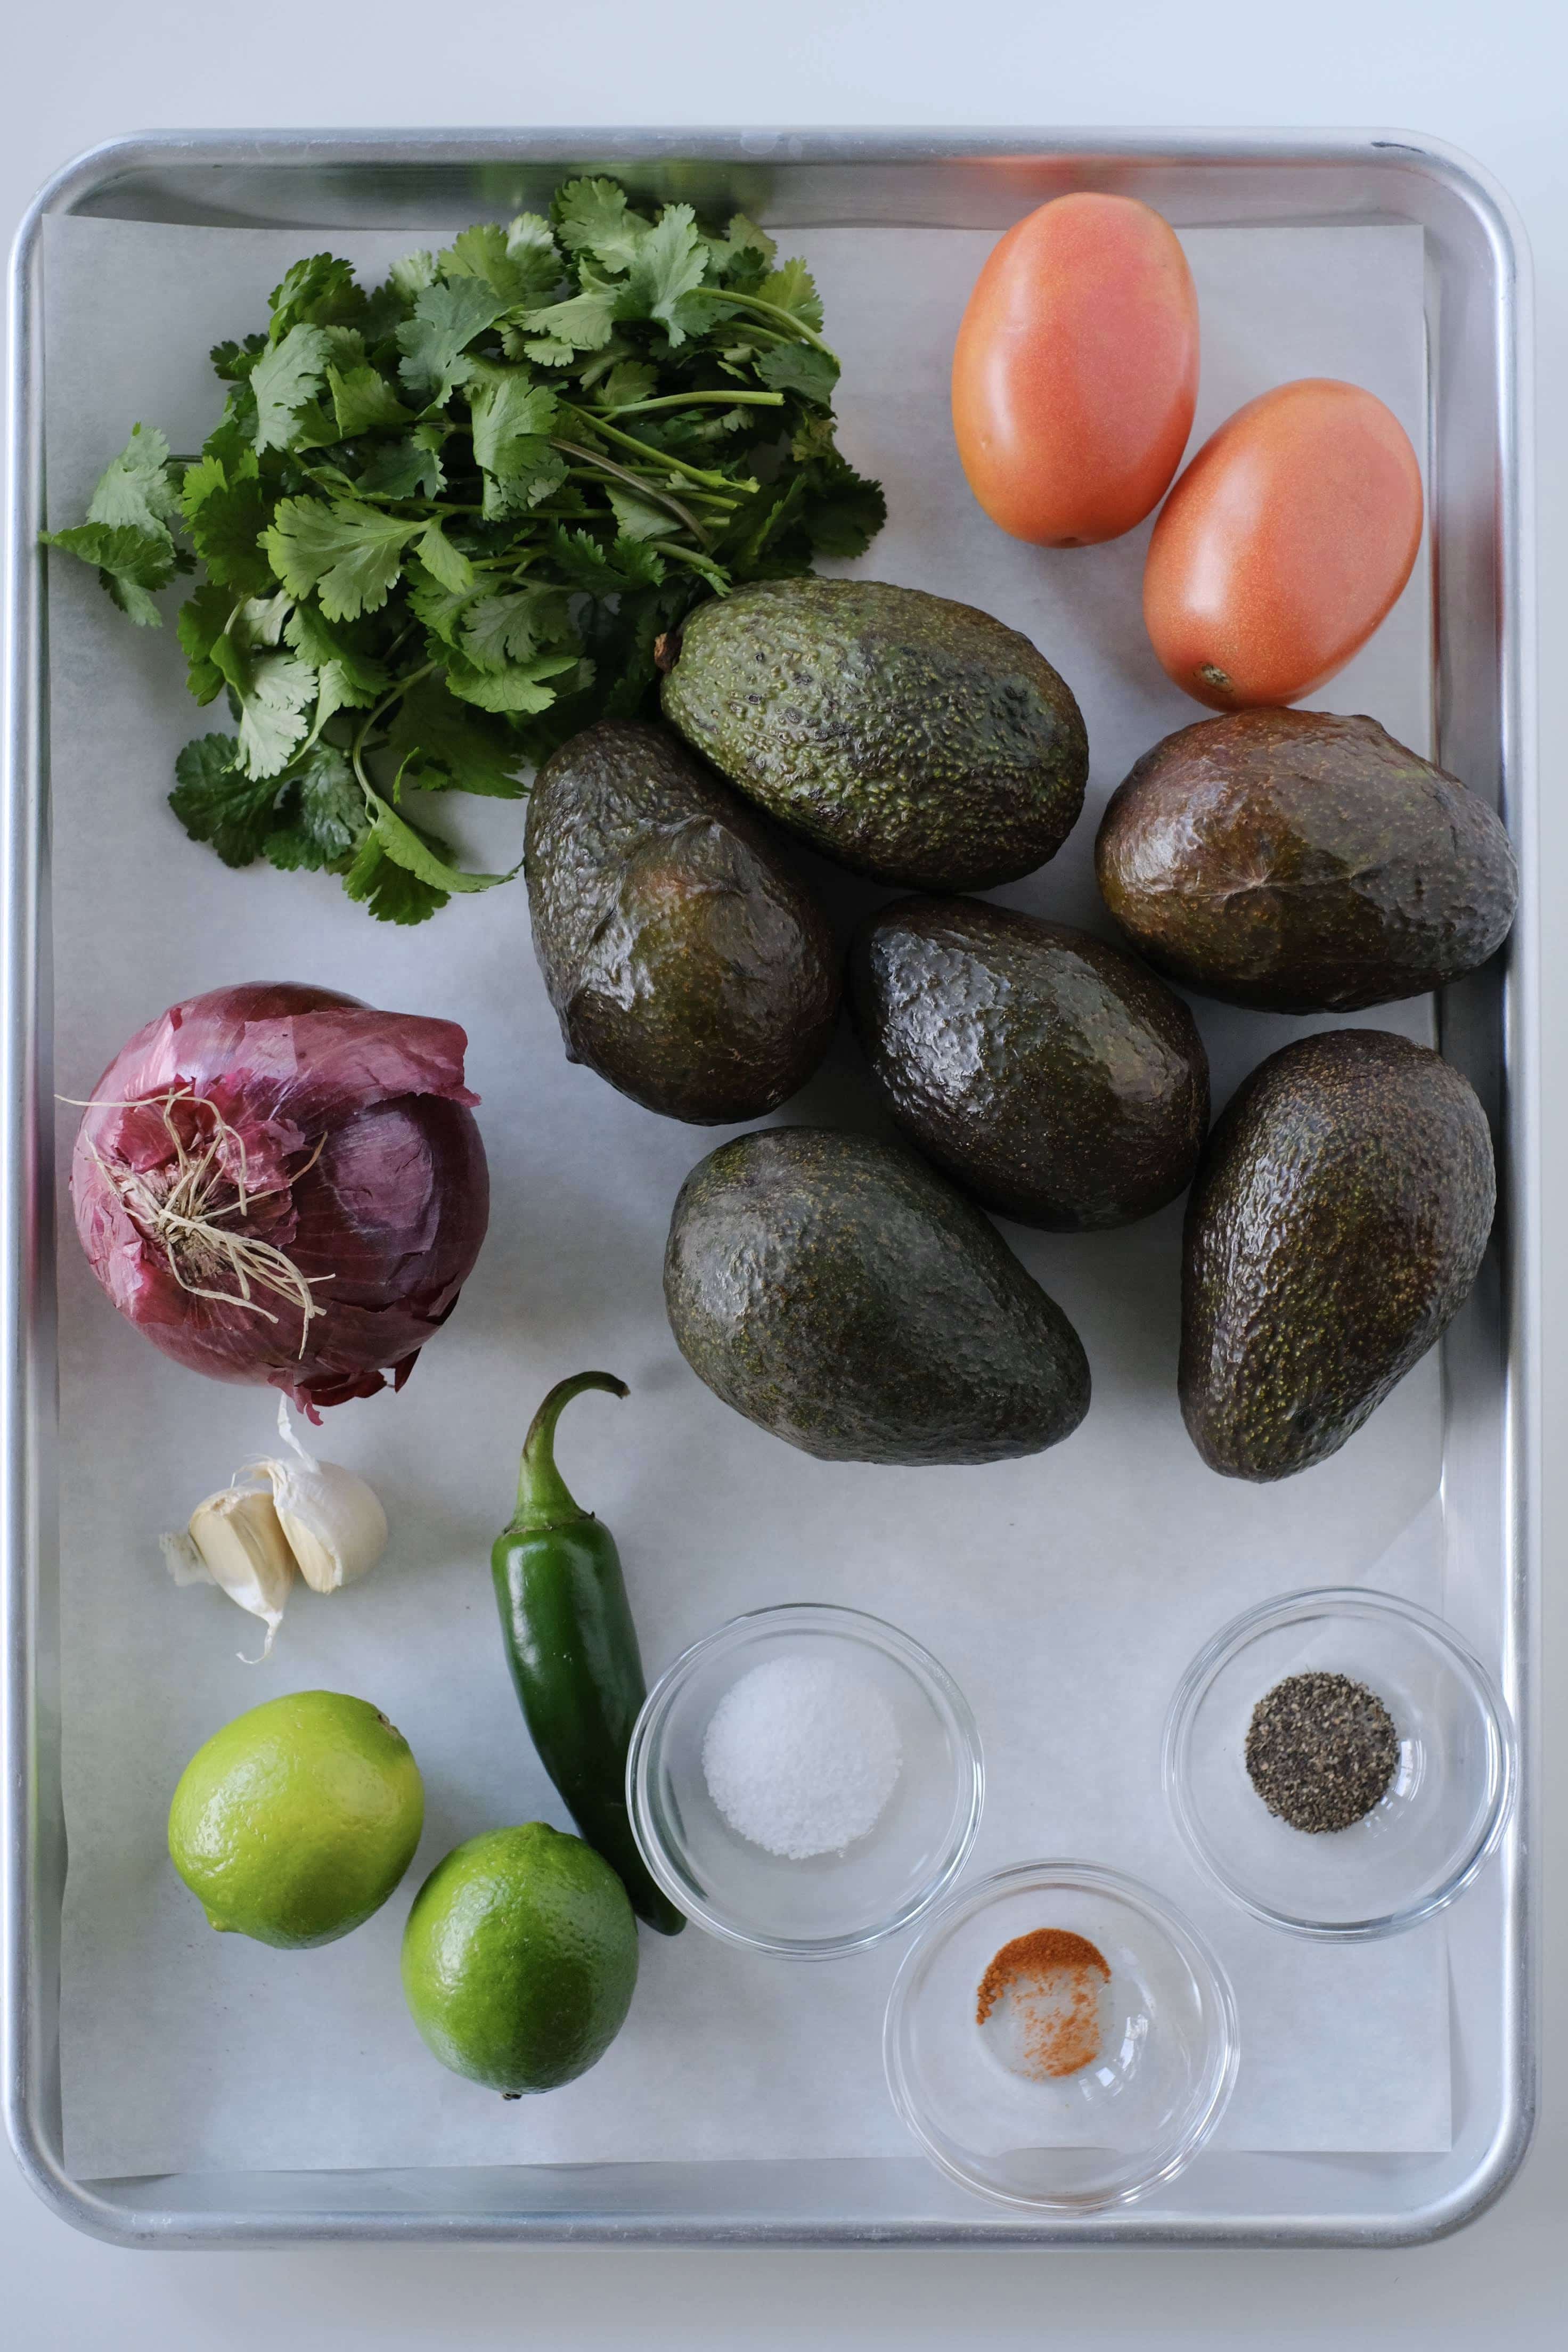 Ingredients for guacamole on a tray